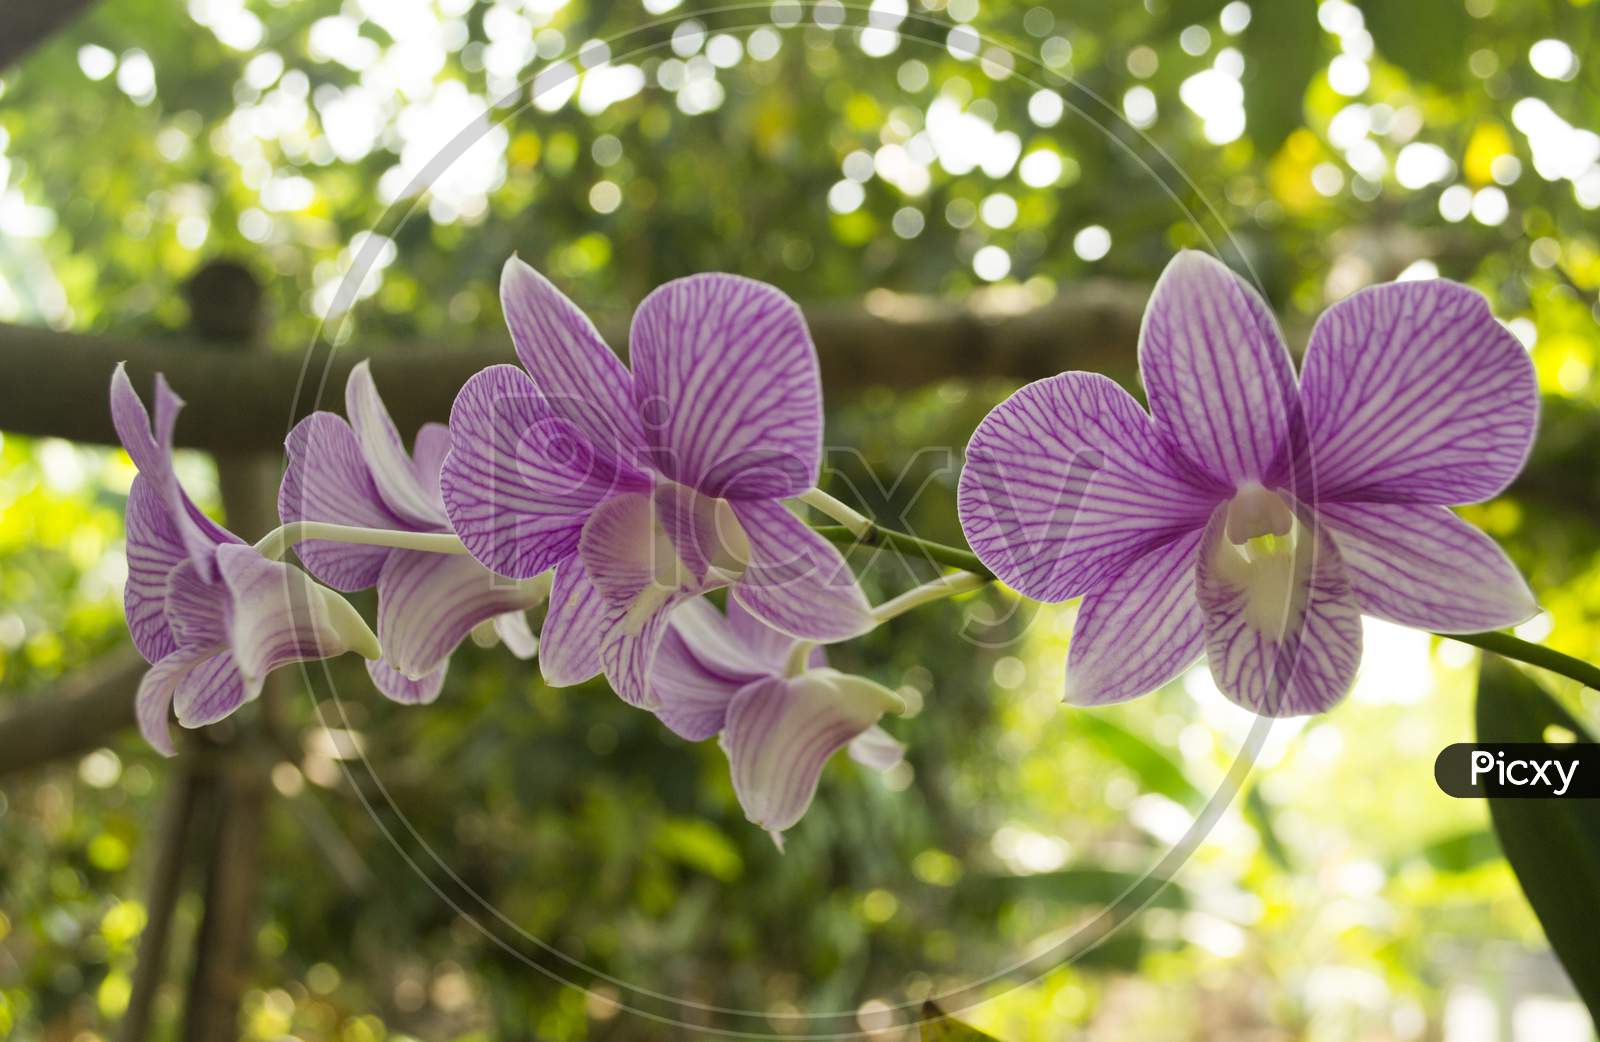 The Beautiful Stem Of Vibrant Purple Colored Orchid Flowers